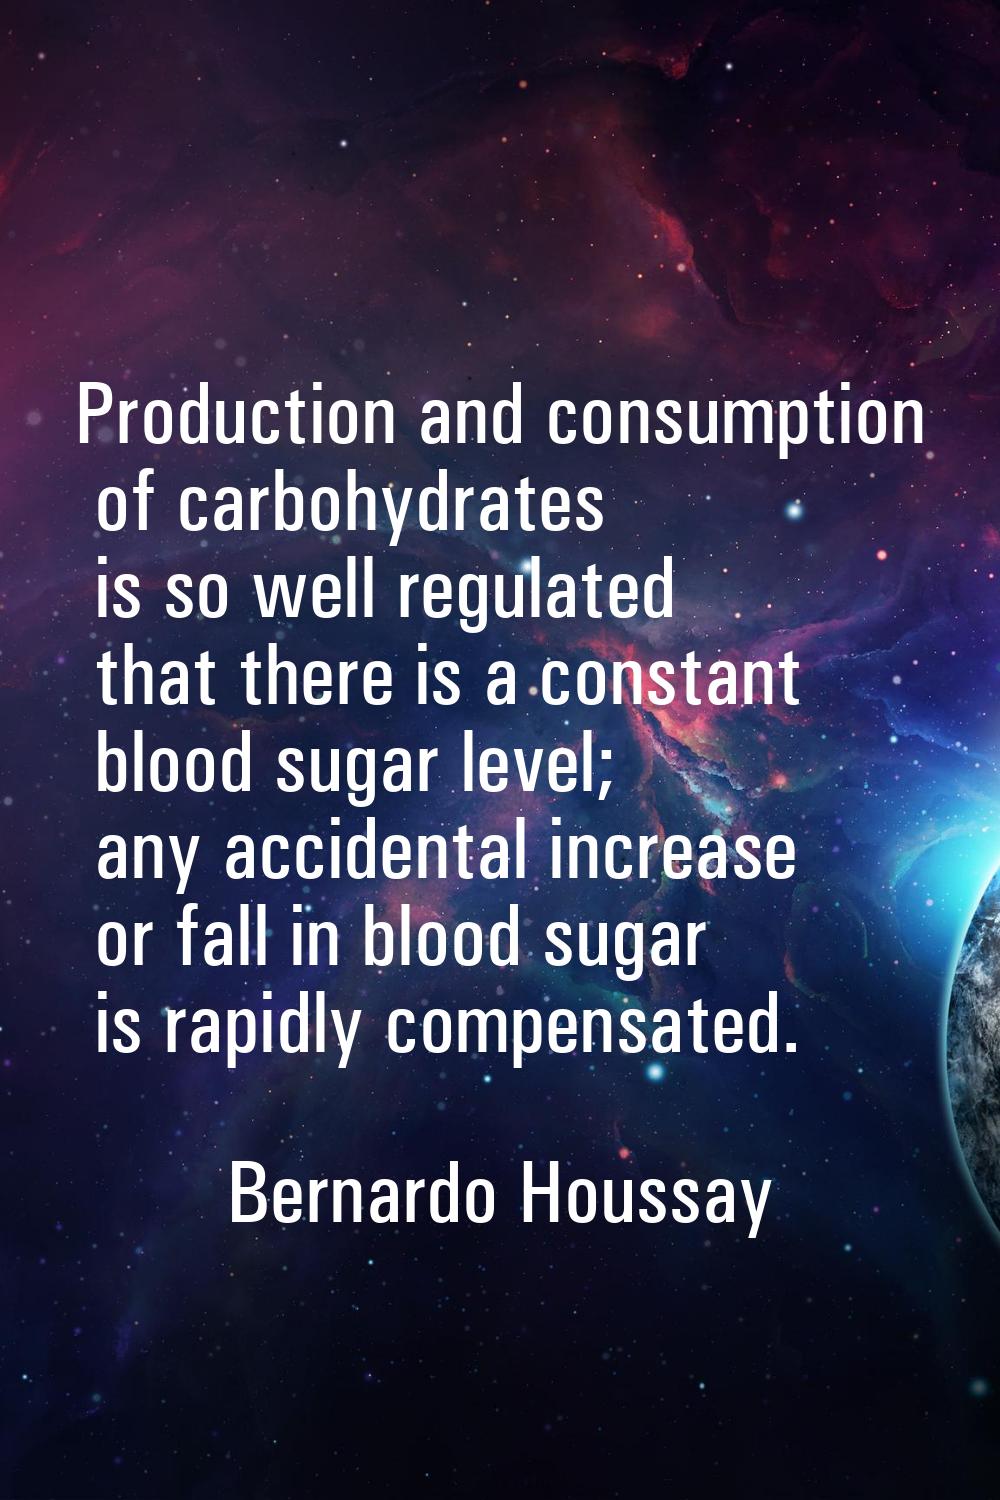 Production and consumption of carbohydrates is so well regulated that there is a constant blood sug